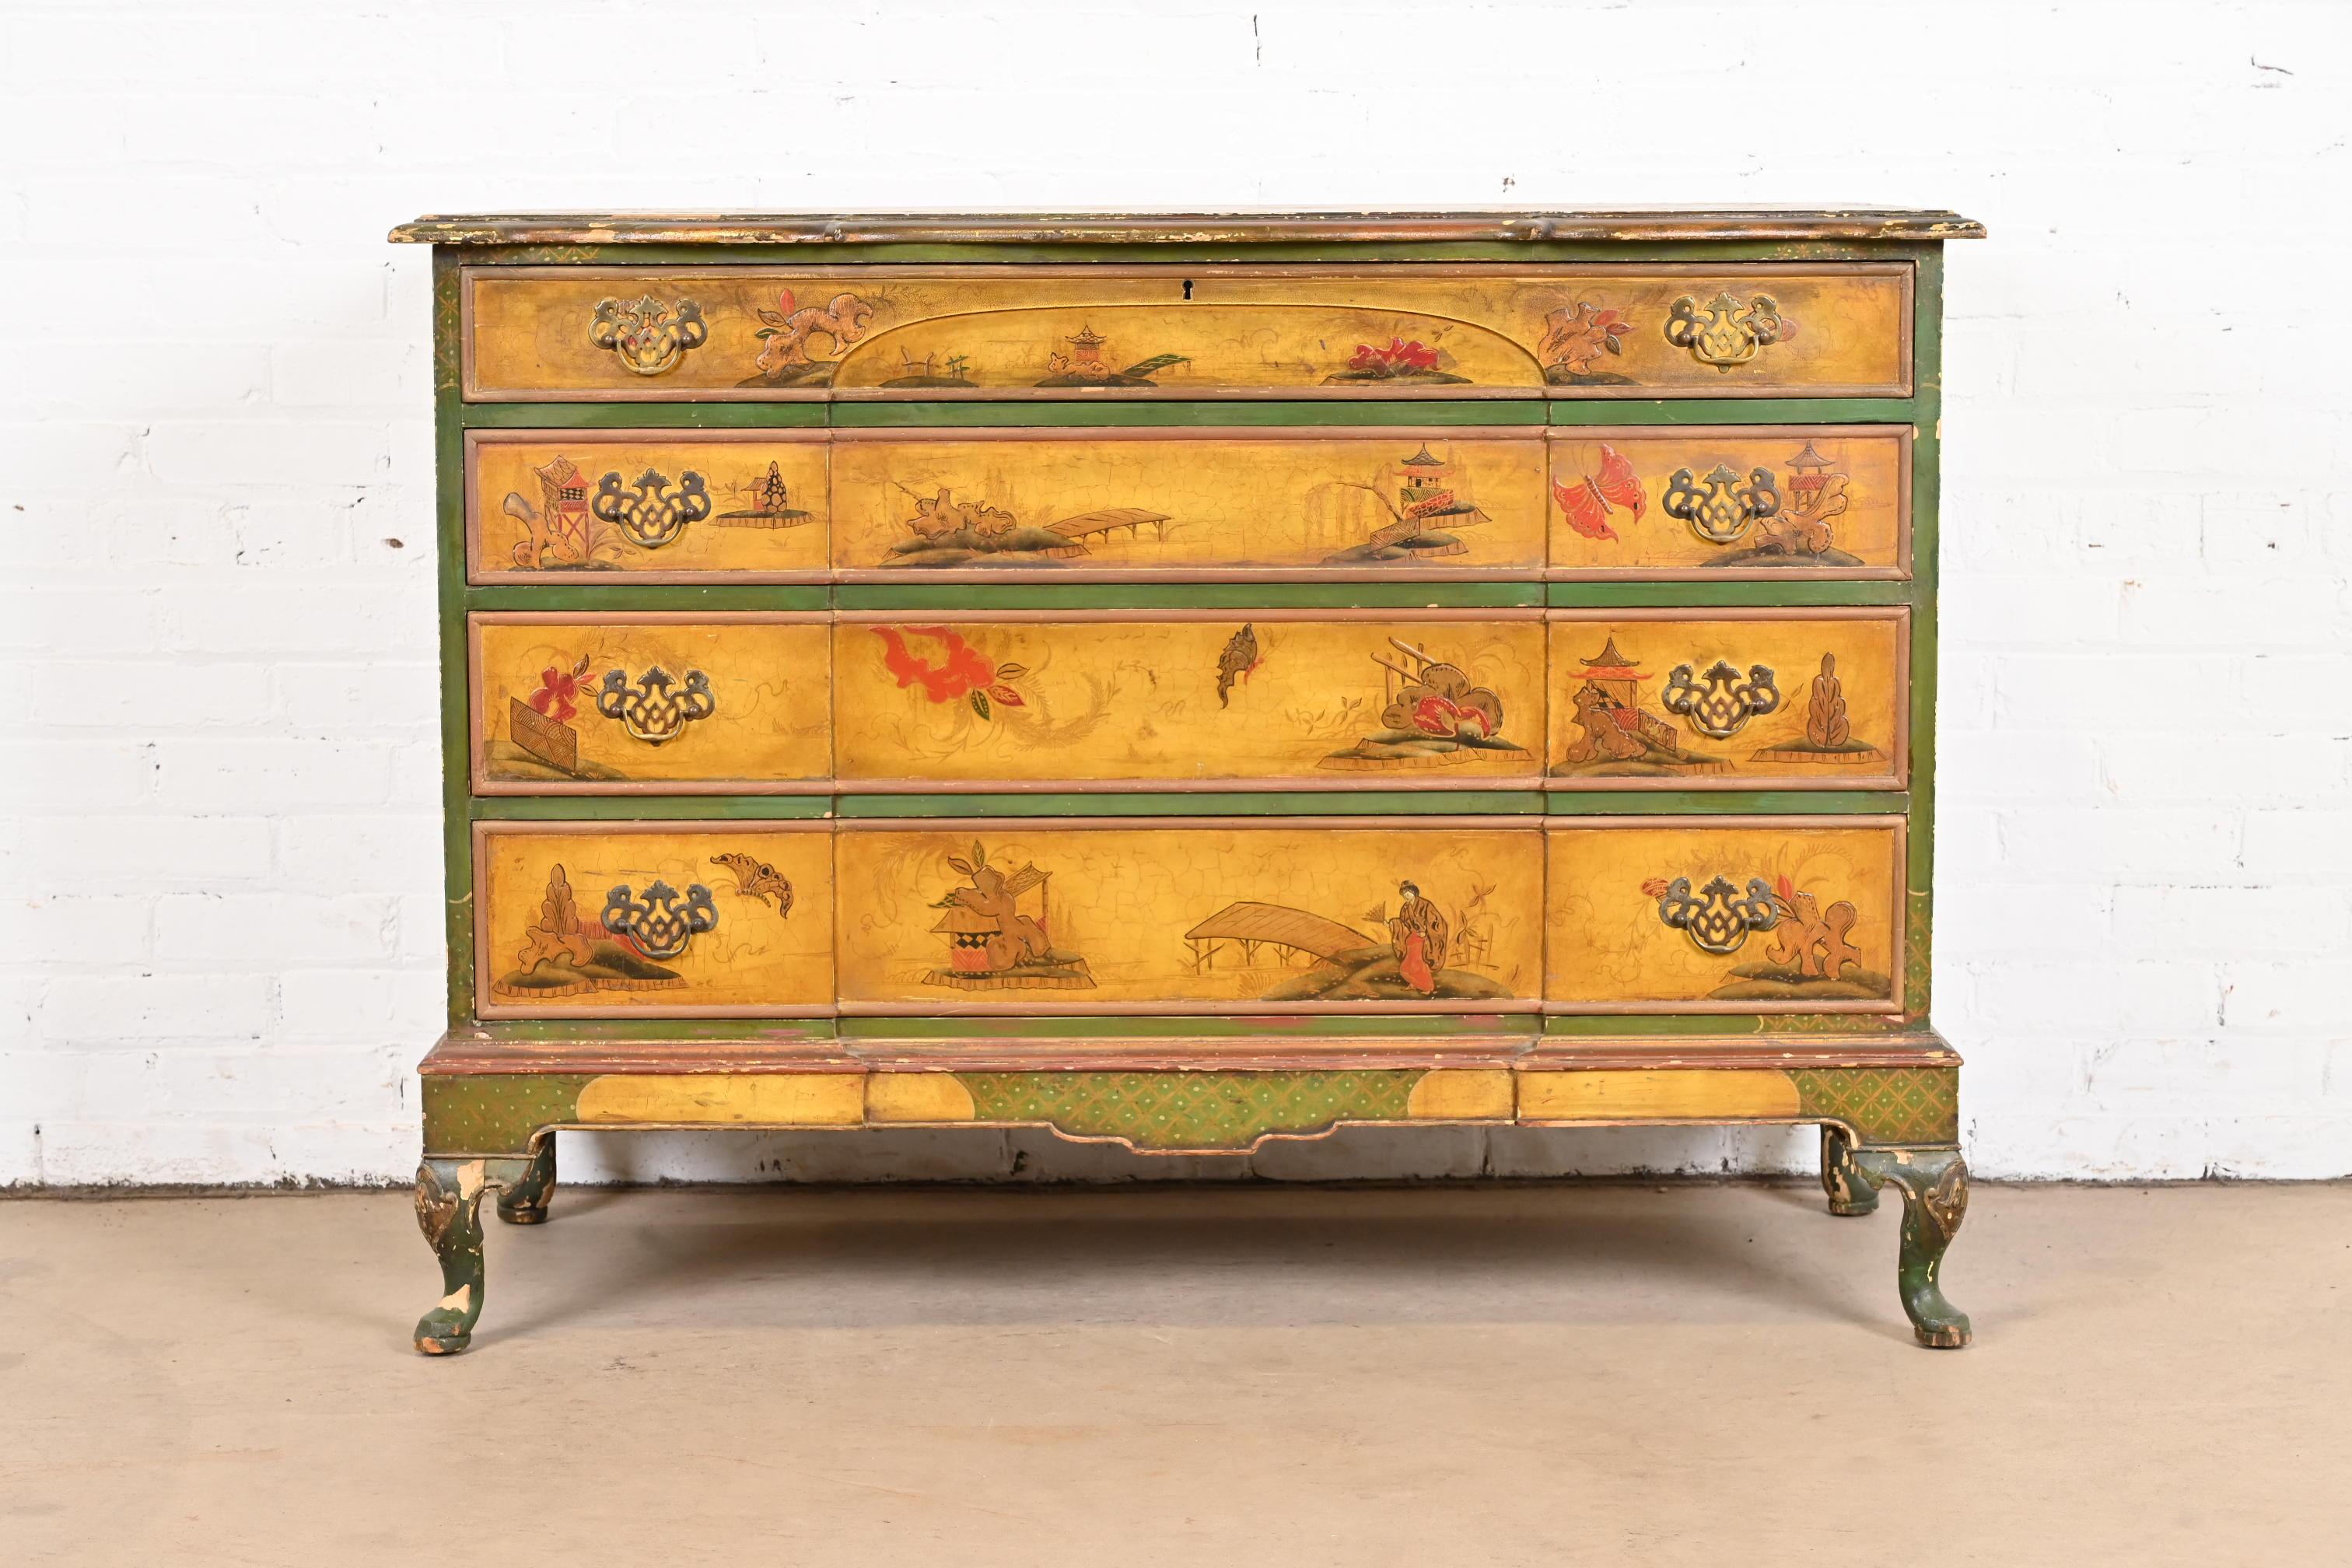 American Antique Japanned Chinoiserie Queen Anne Bureau From Historic Edgecroft Mansion For Sale